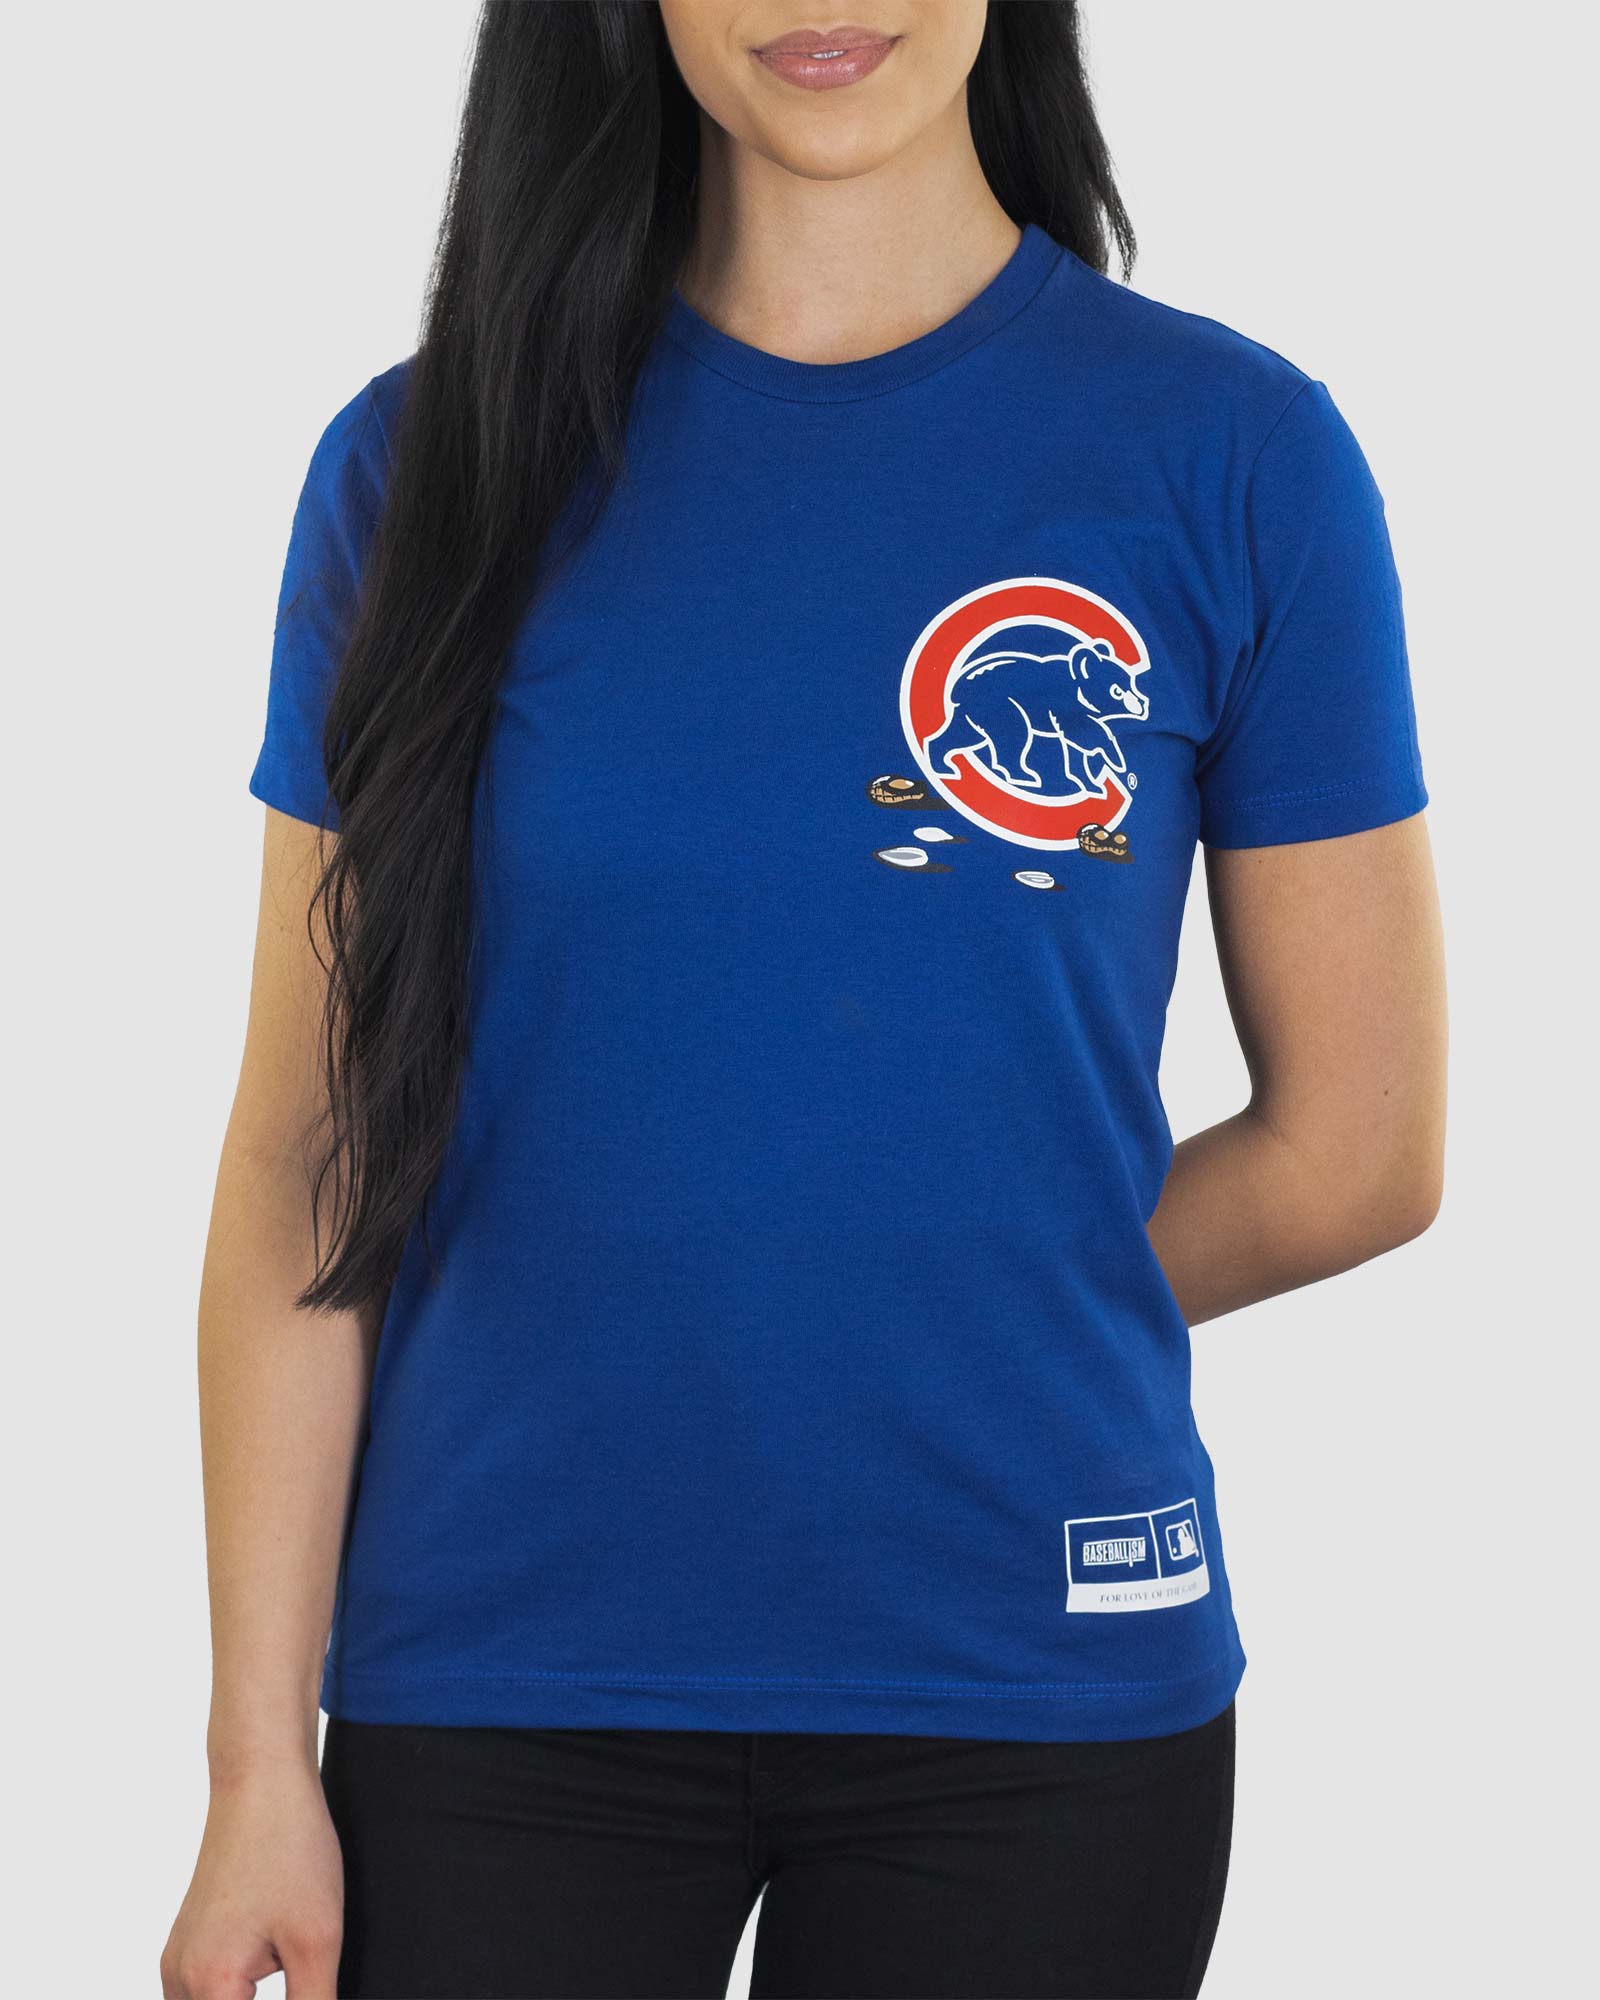 Chicago Cubs Apparel  Hats, Clothing & More